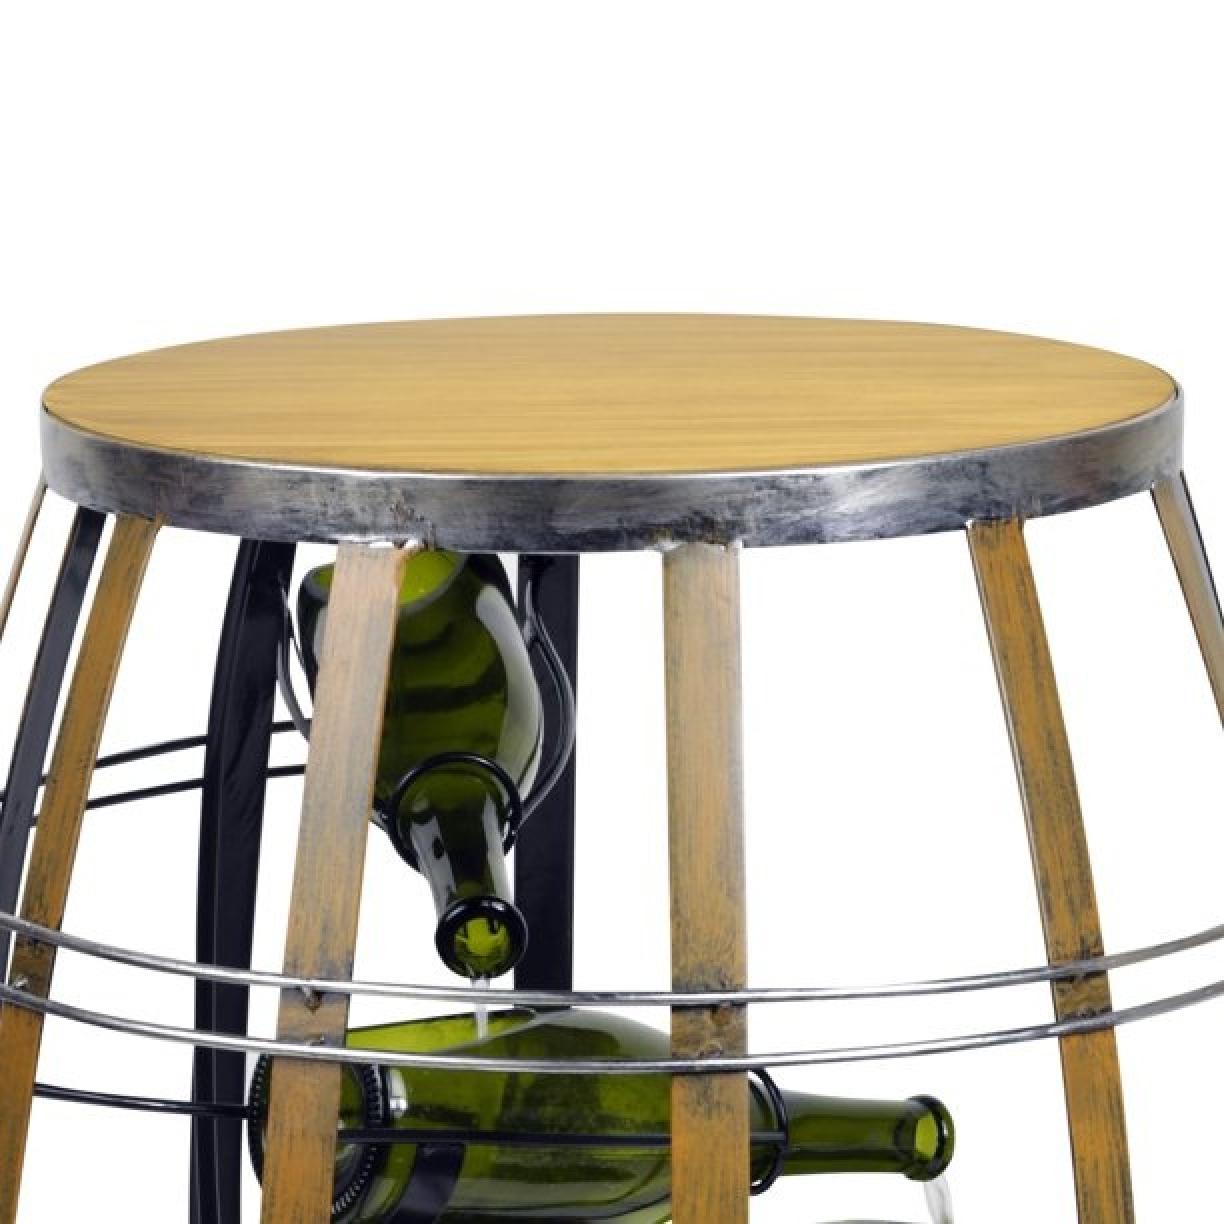 Wine Barrel Table Fountain With Tiered Glass Bottles